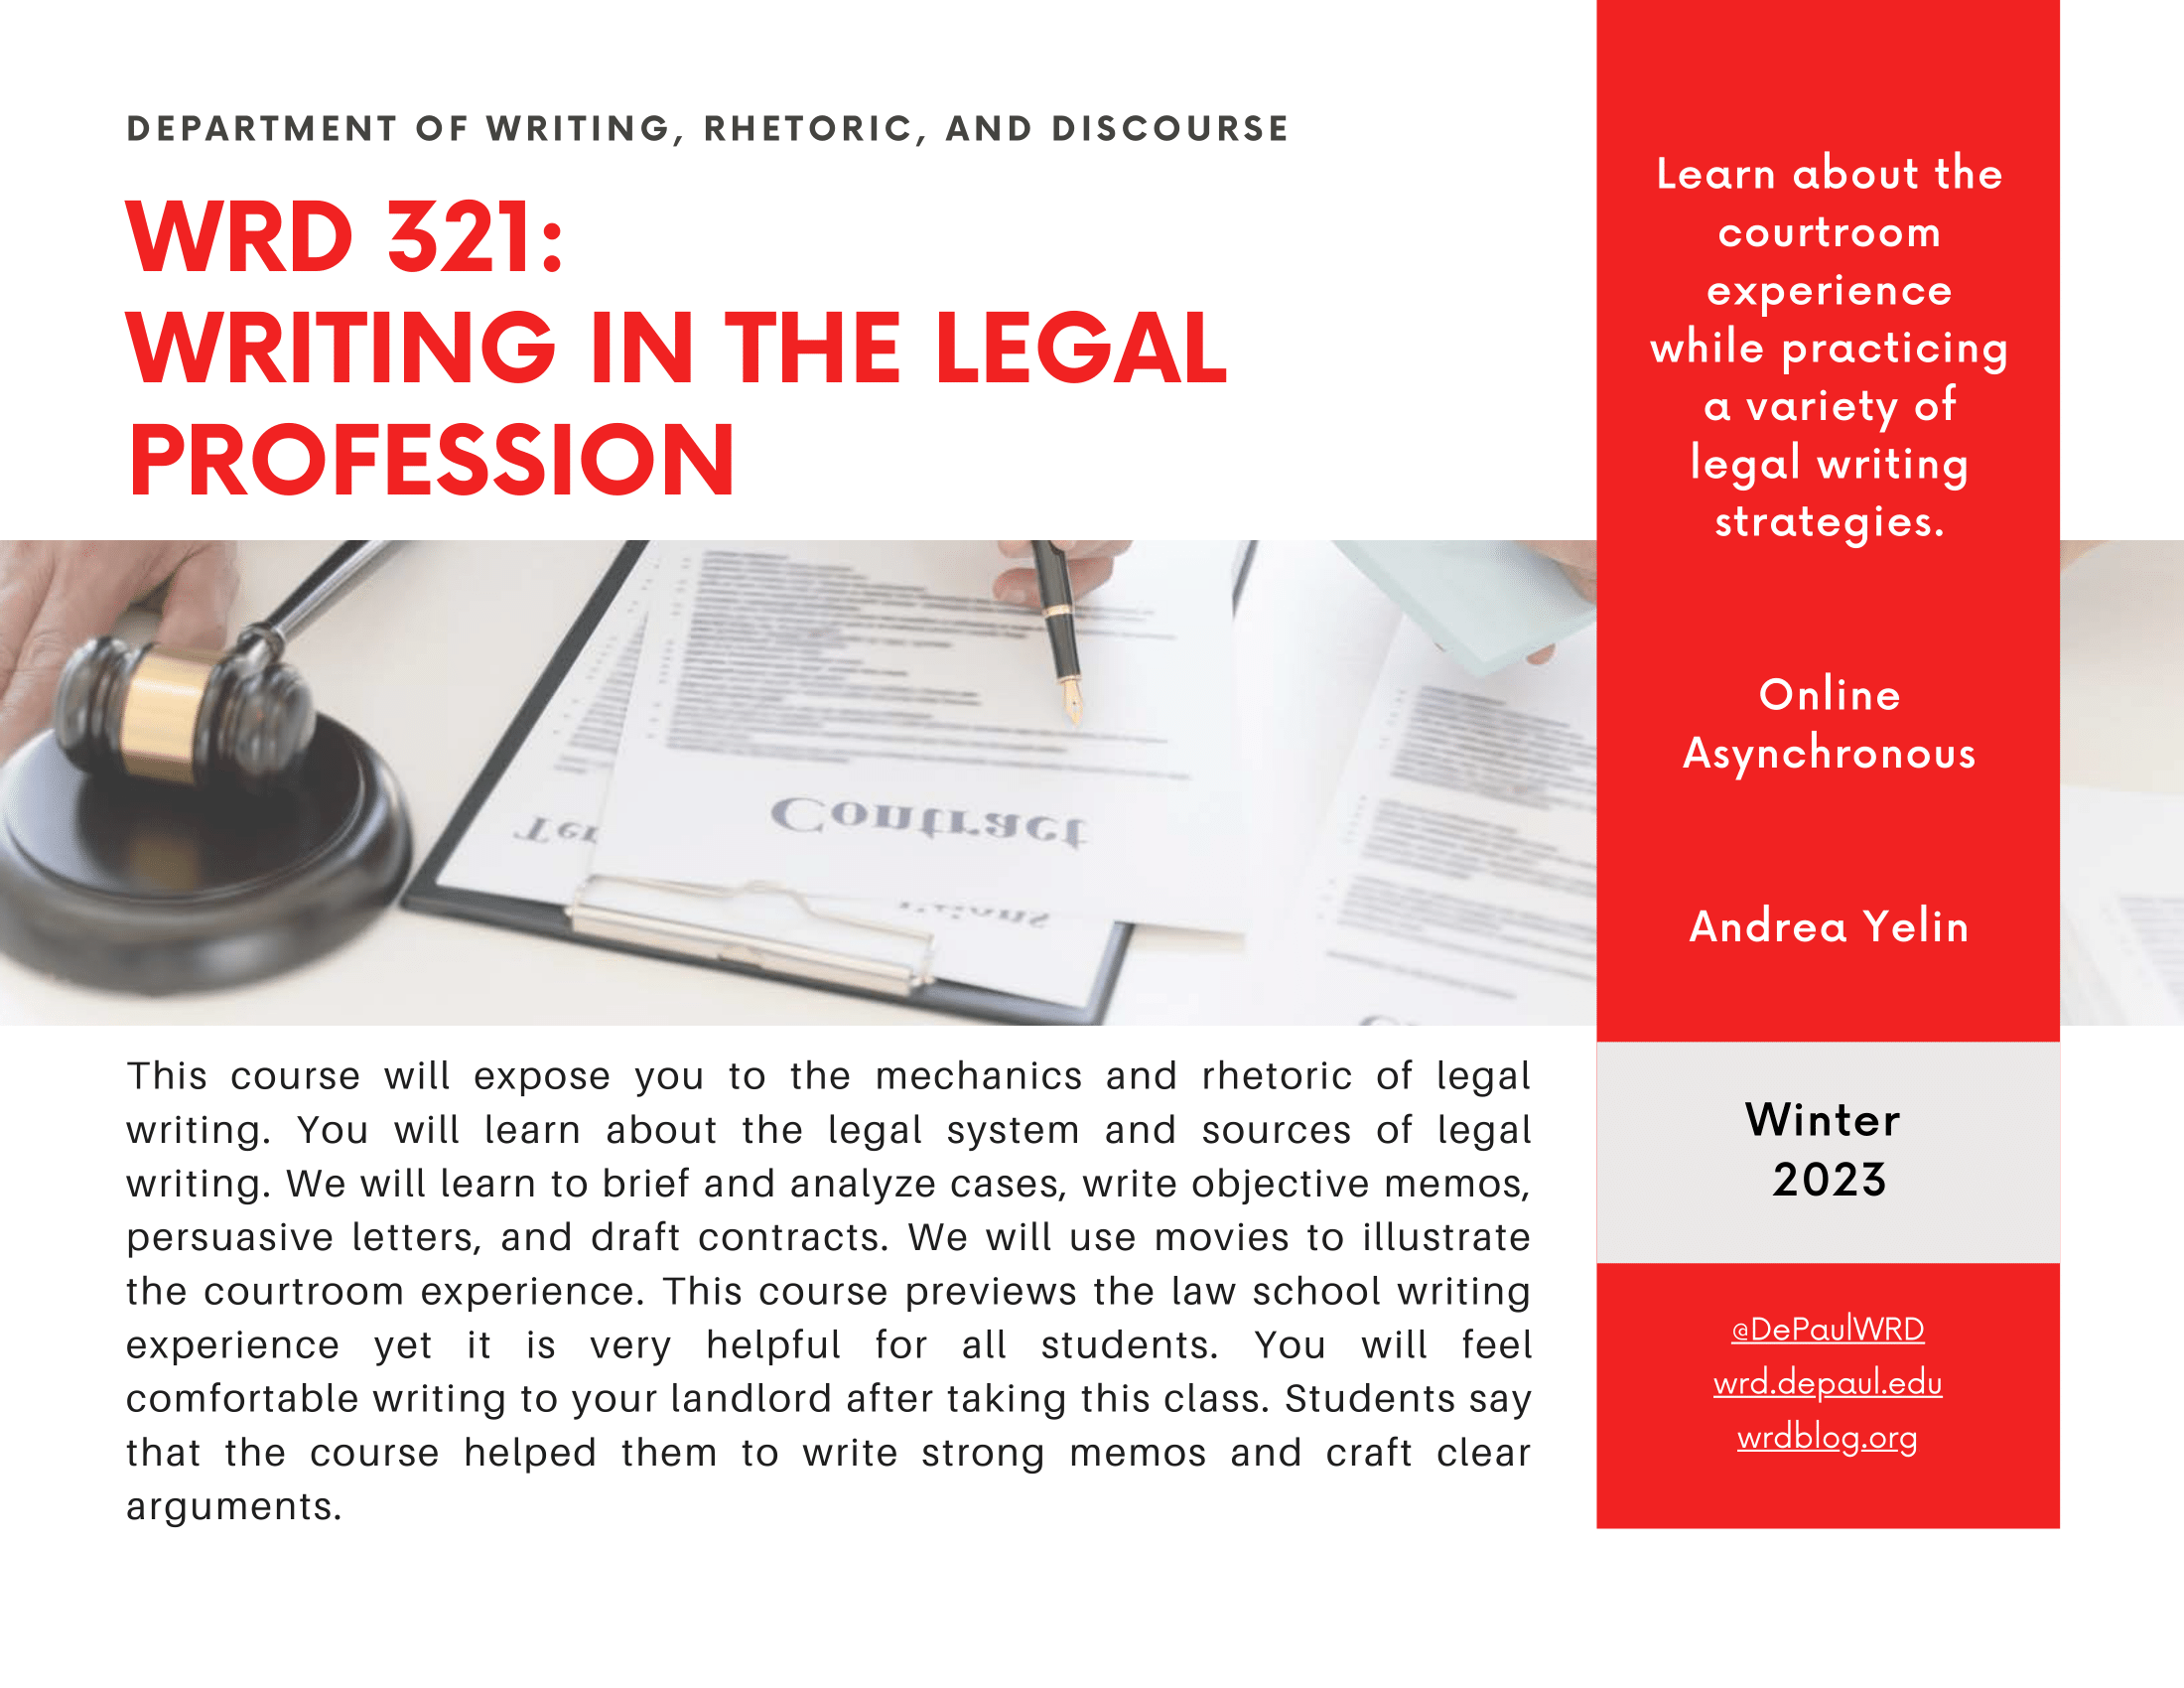 WRD 321: WRITING IN THE LEGAL PROFESSION